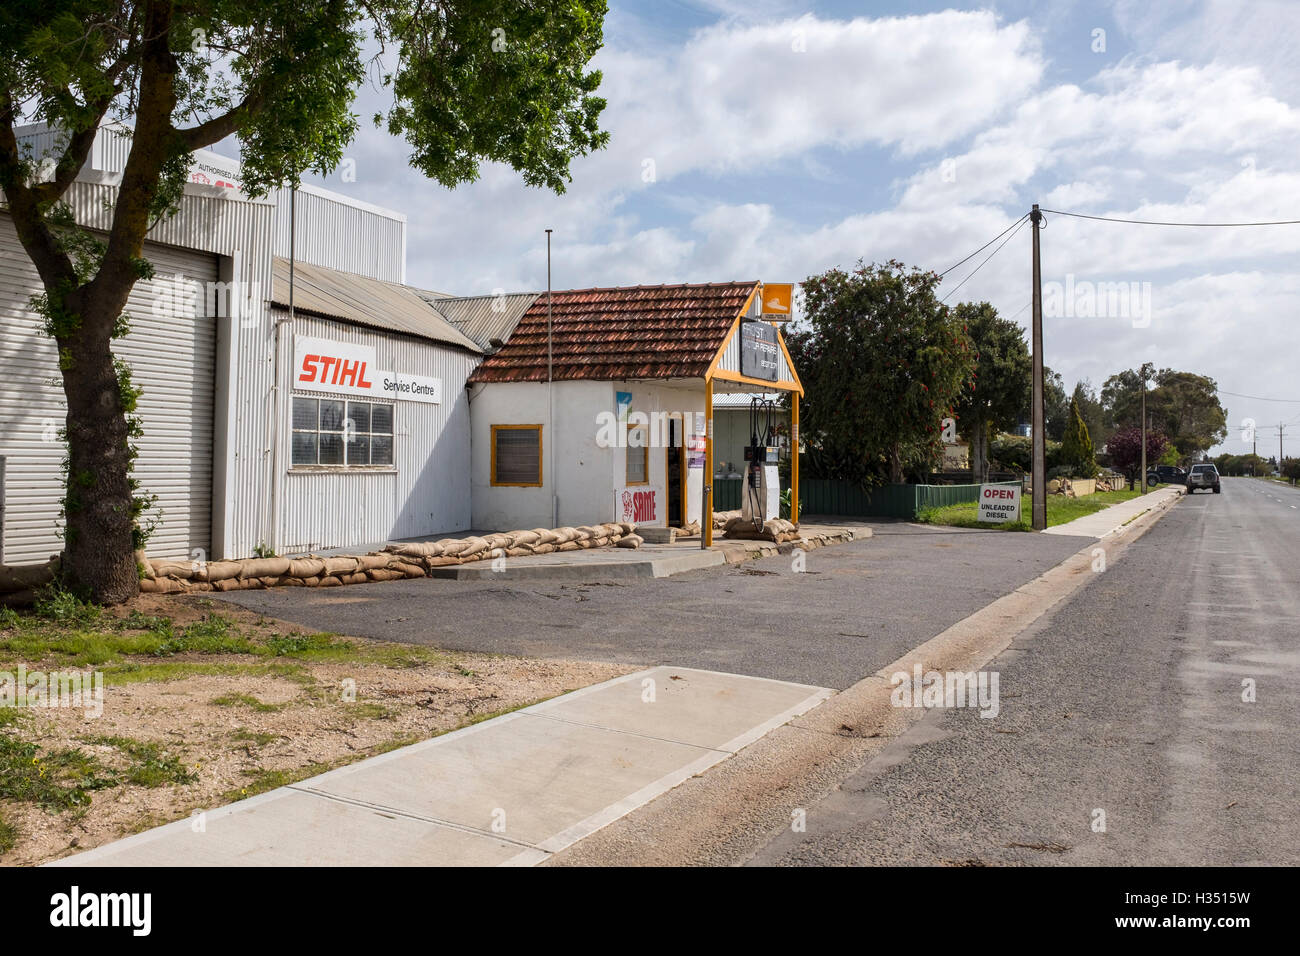 Langhorne Creek, South Australia. 4th October, 2016. A sandbagged business prepared for the flood in Langhorne Creek South Australia after the swollen Bremer River burst its banks, south of Adelaide. The third flood emergency in two weeks. Ray Warren/Alamy Live News Stock Photo